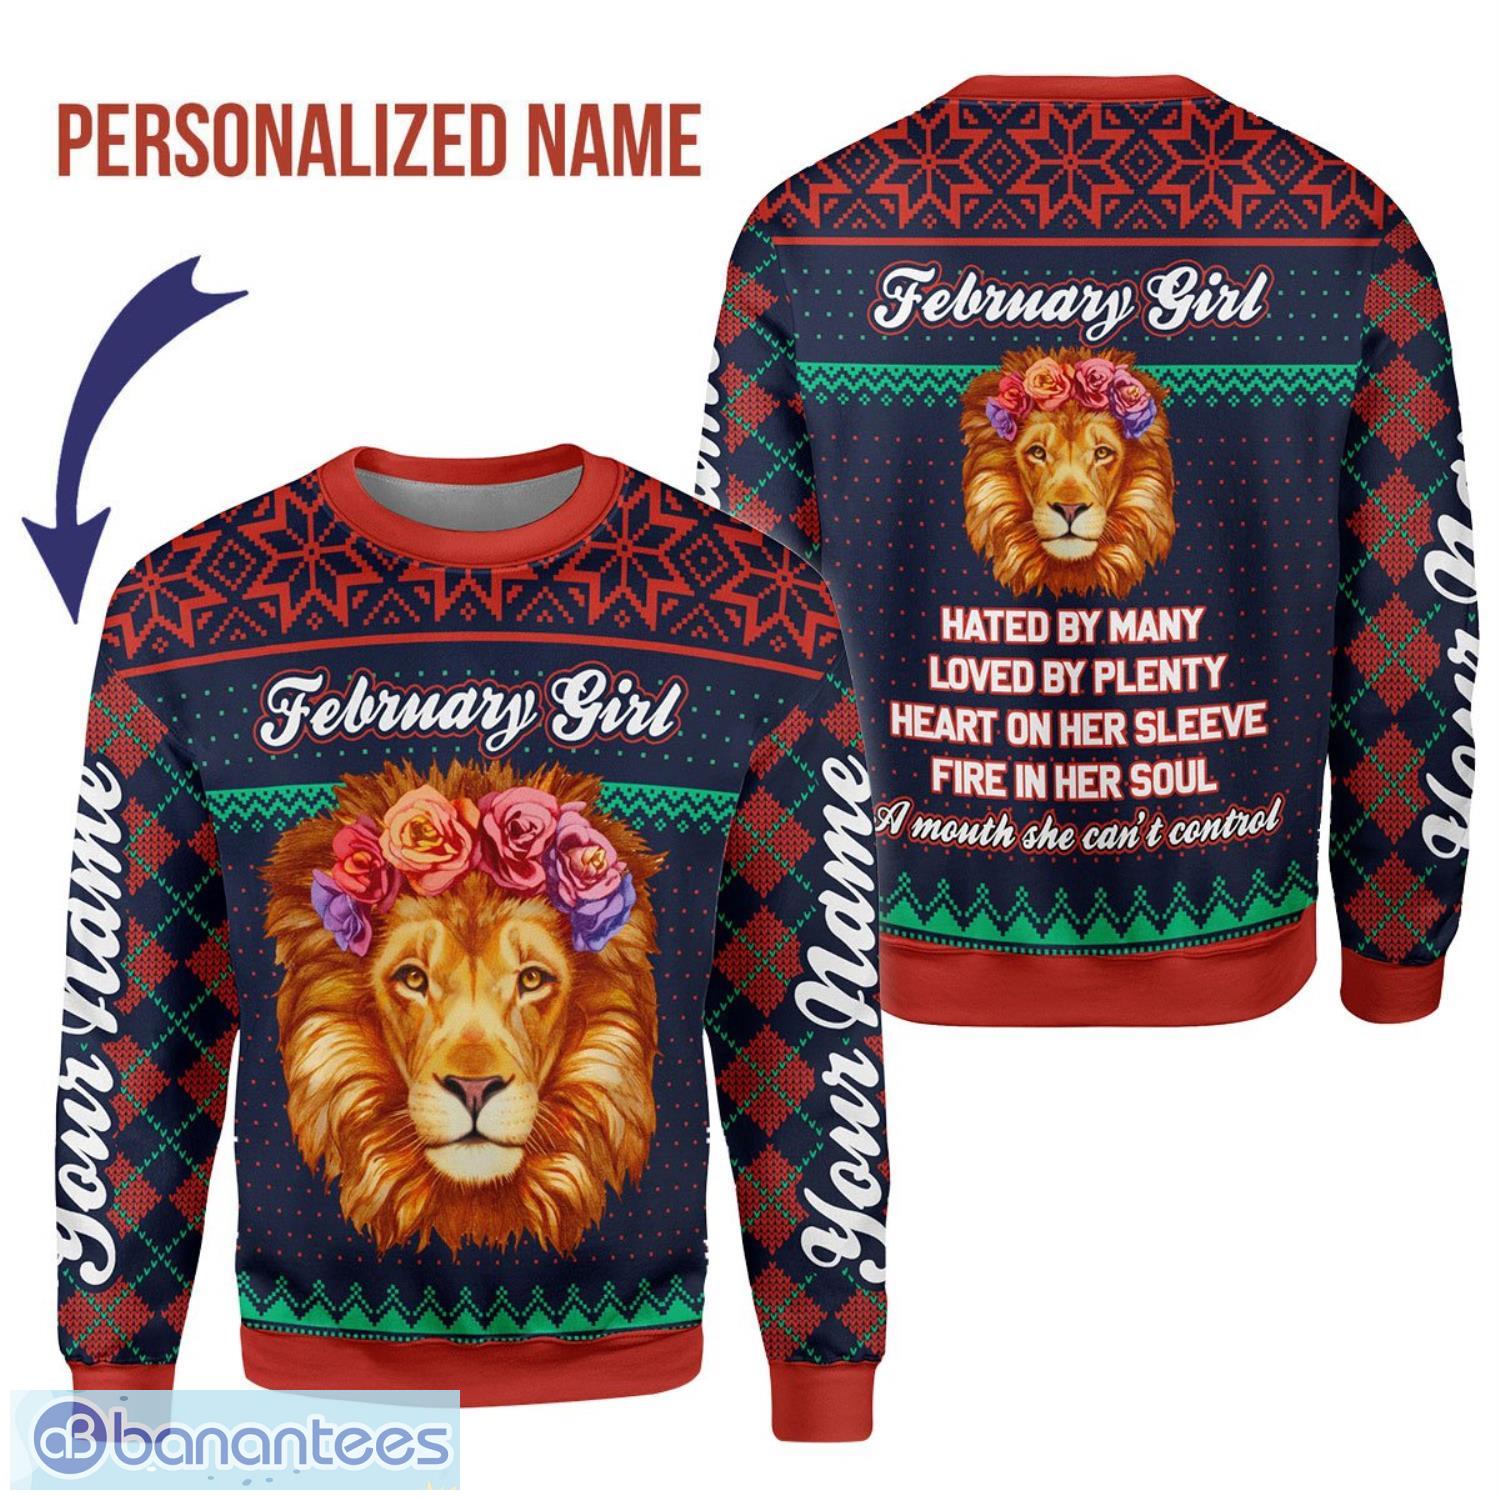 Personalized Name February Girl Fire In Her Soul A Mouth She Can't Control 3D Ugly Christmas Sweater Christmas Gift Product Photo 1